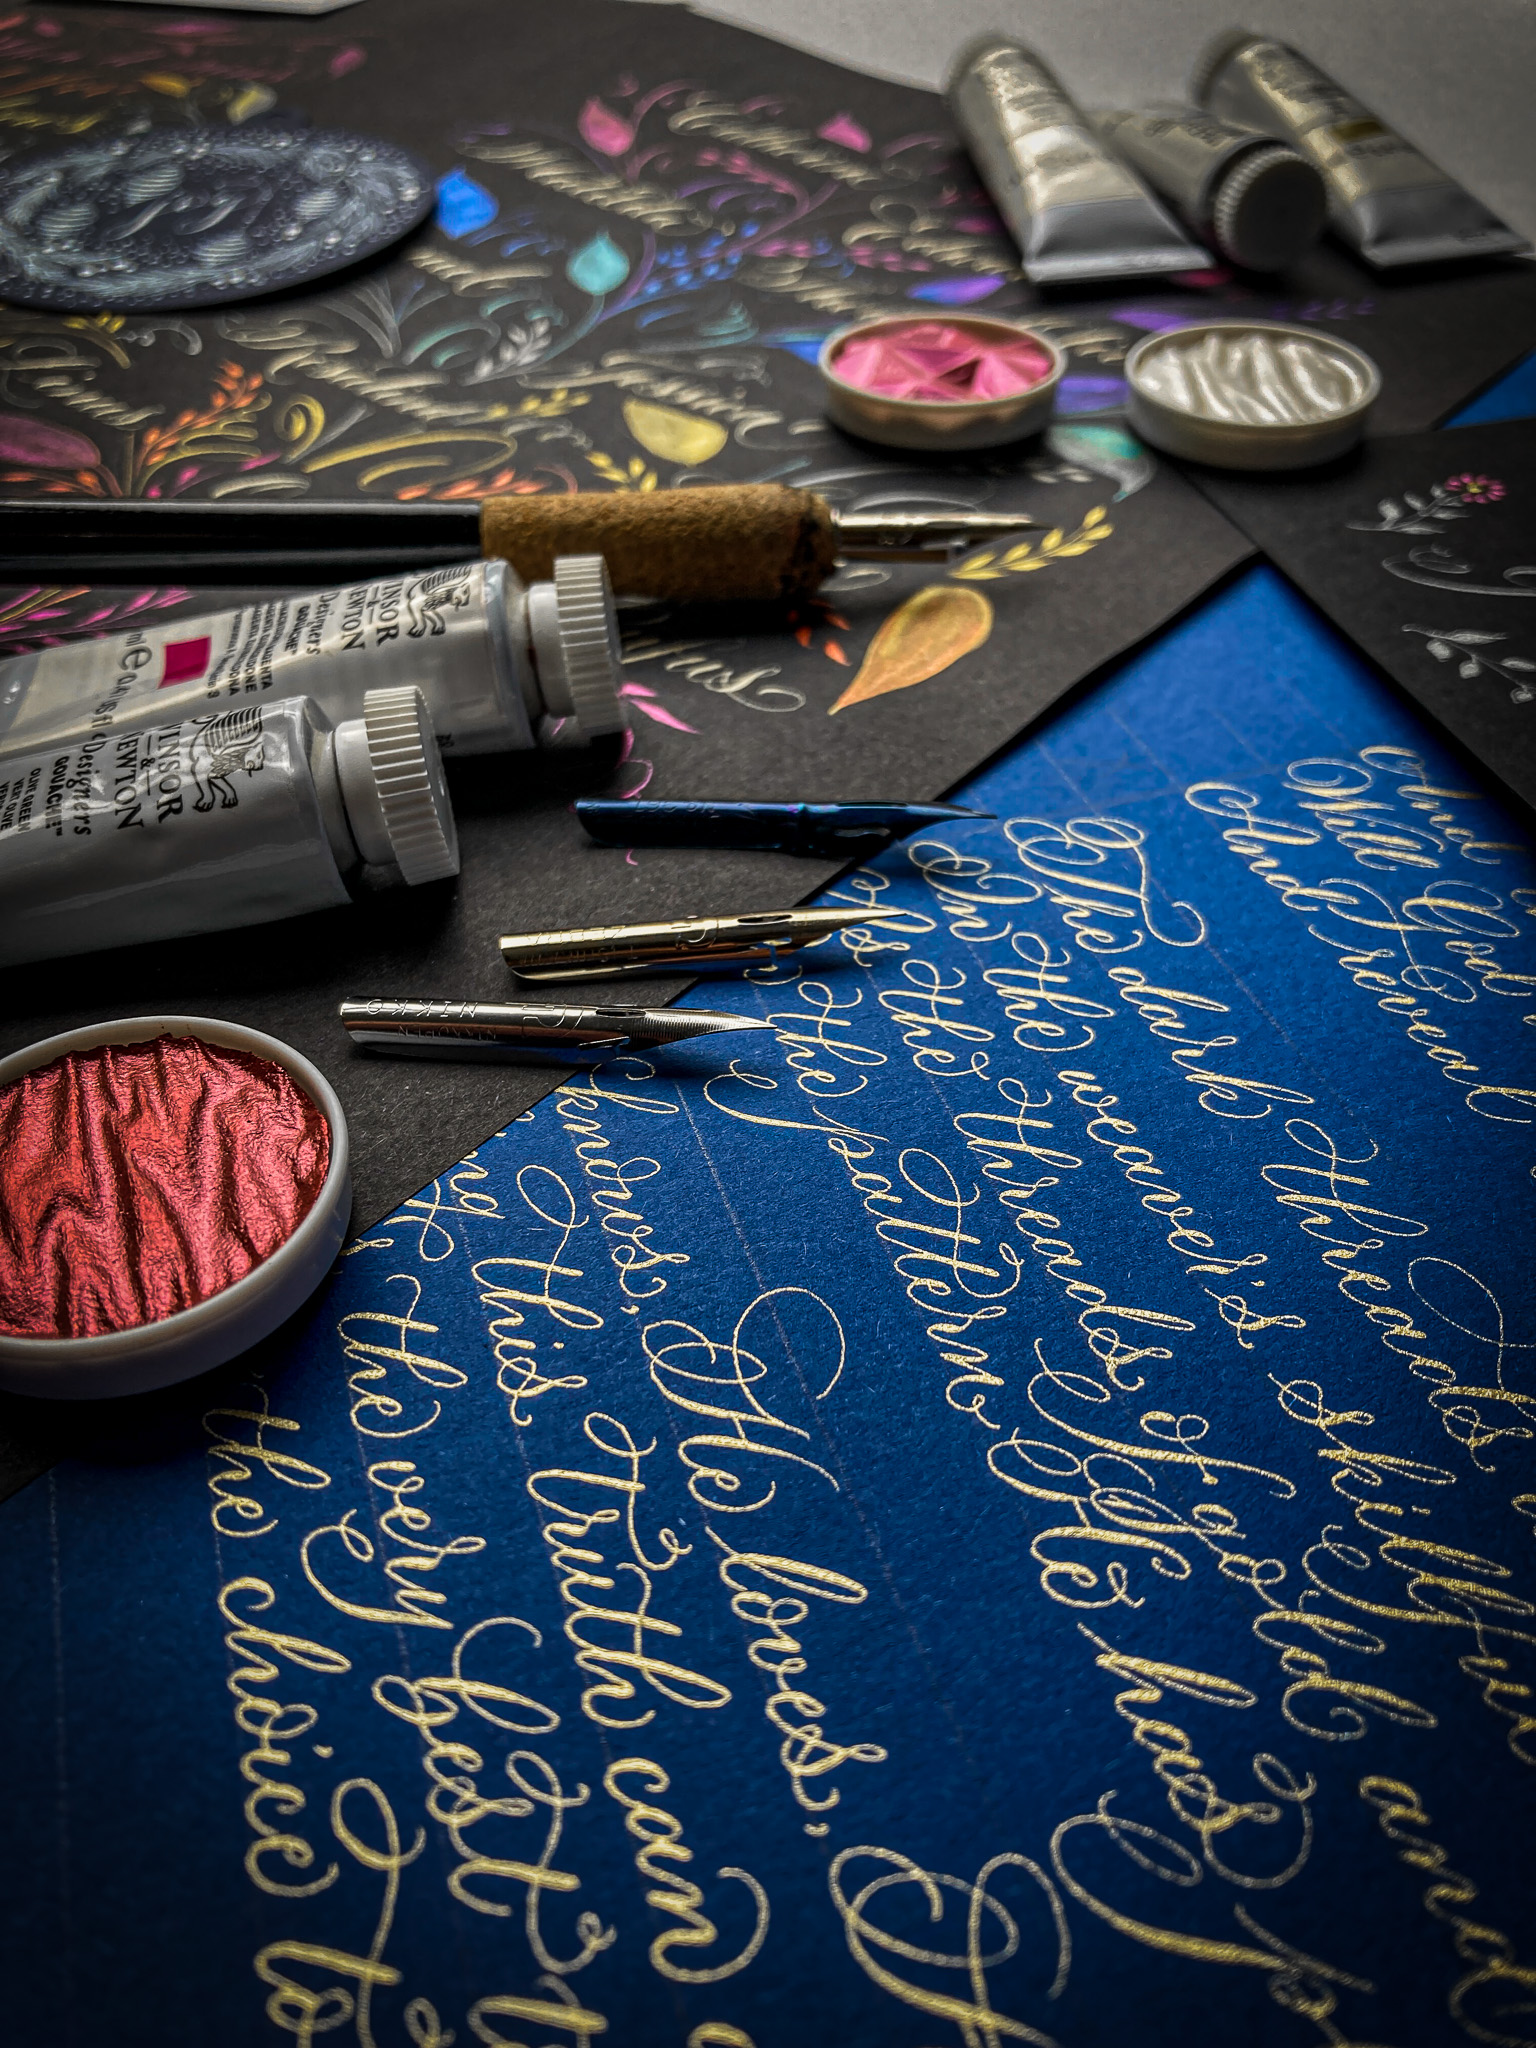 contemporary calligraphy art from workshops in Cumbria